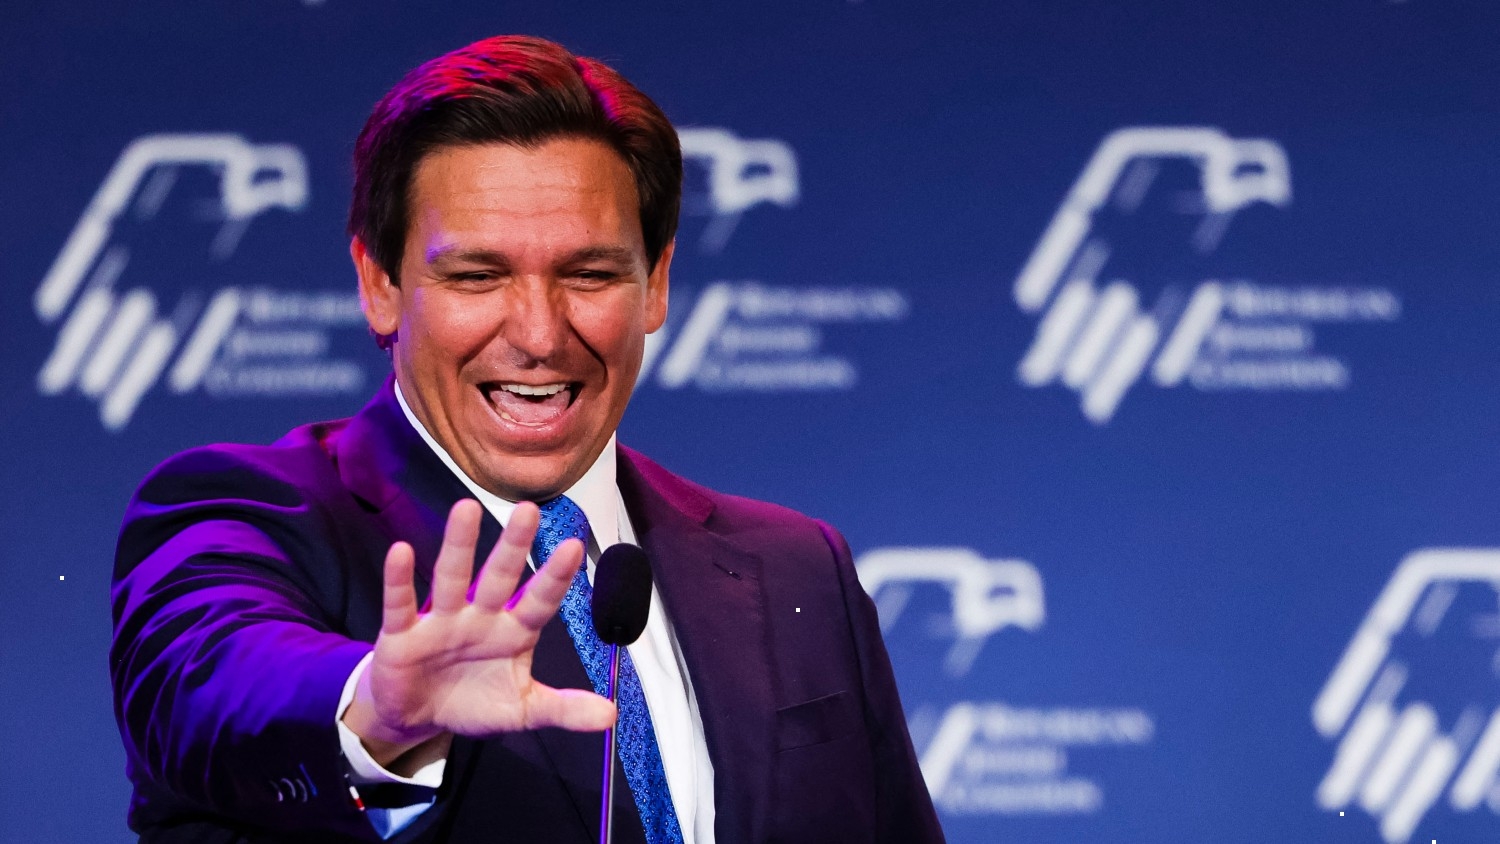 Republican Florida Governor Ron DeSantis waves to supporters at the Republican Jewish Coalition Annual Leadership Meeting in Las Vegas, Nevada, on 19 November 2022.